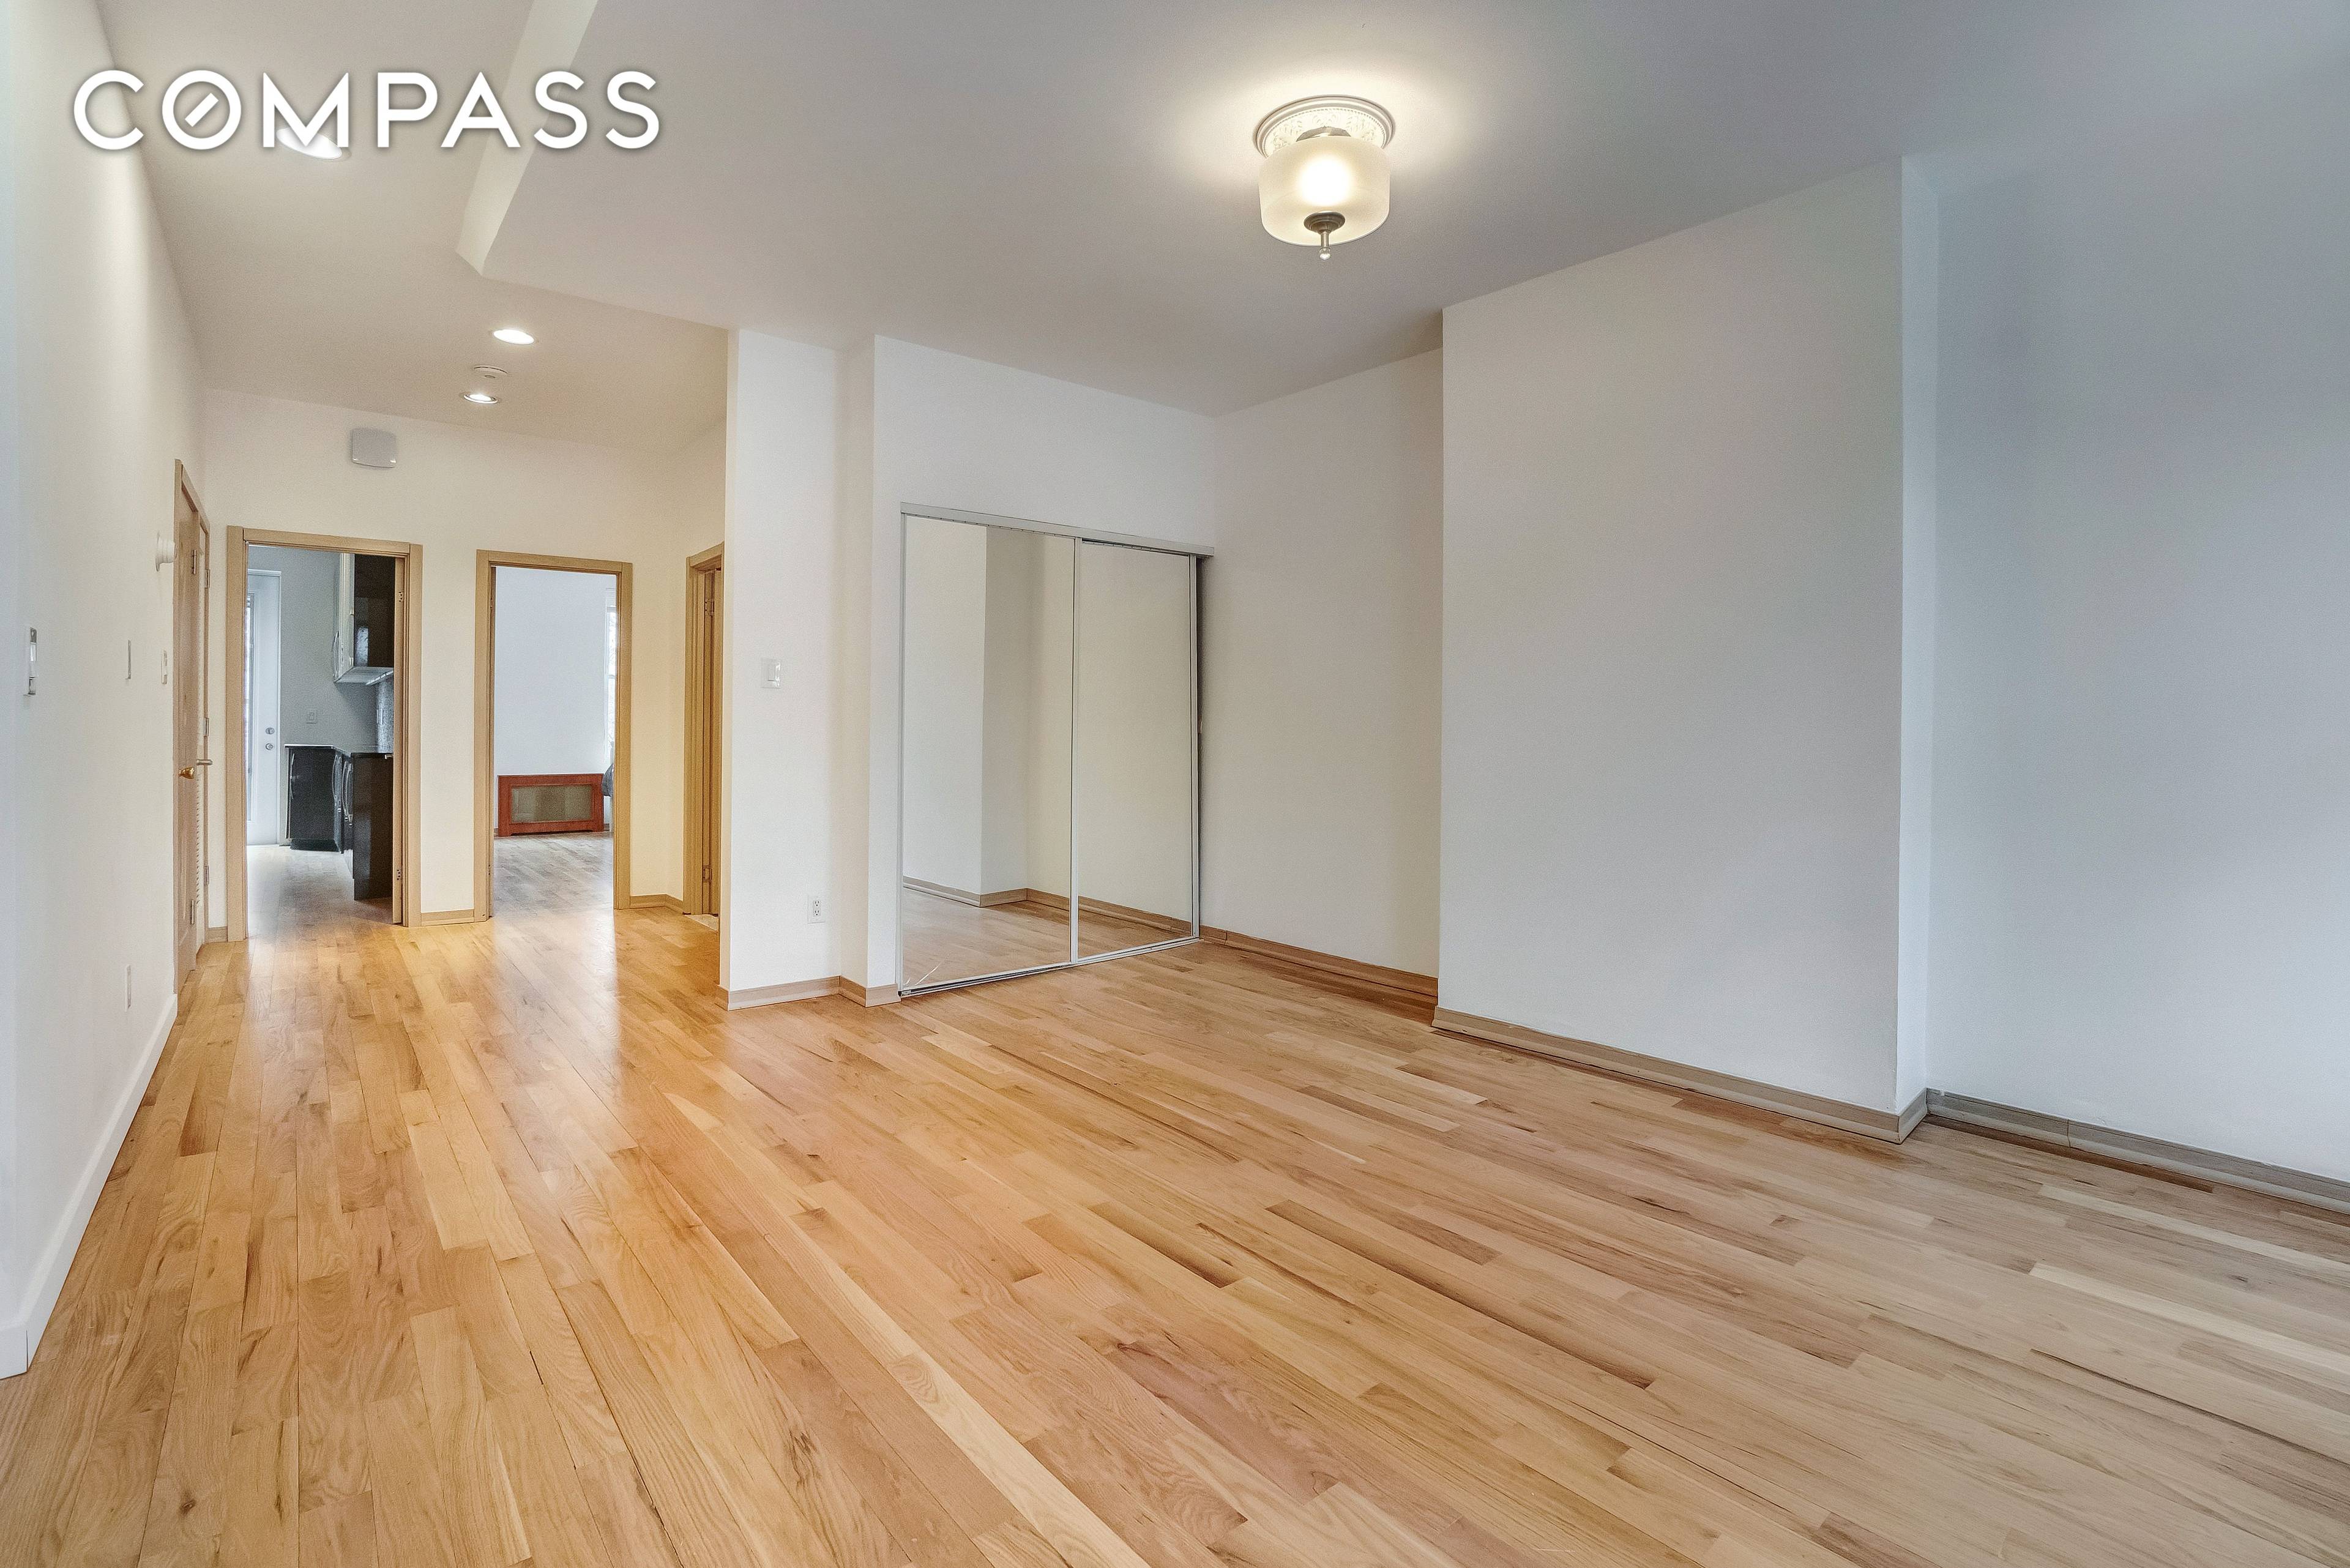 Be the first to enjoy this MASSIVE 4 bedroom 3 bath duplex in the heart of Bushwick Washer and Dryer in the unit A large living room and fully renovated ...